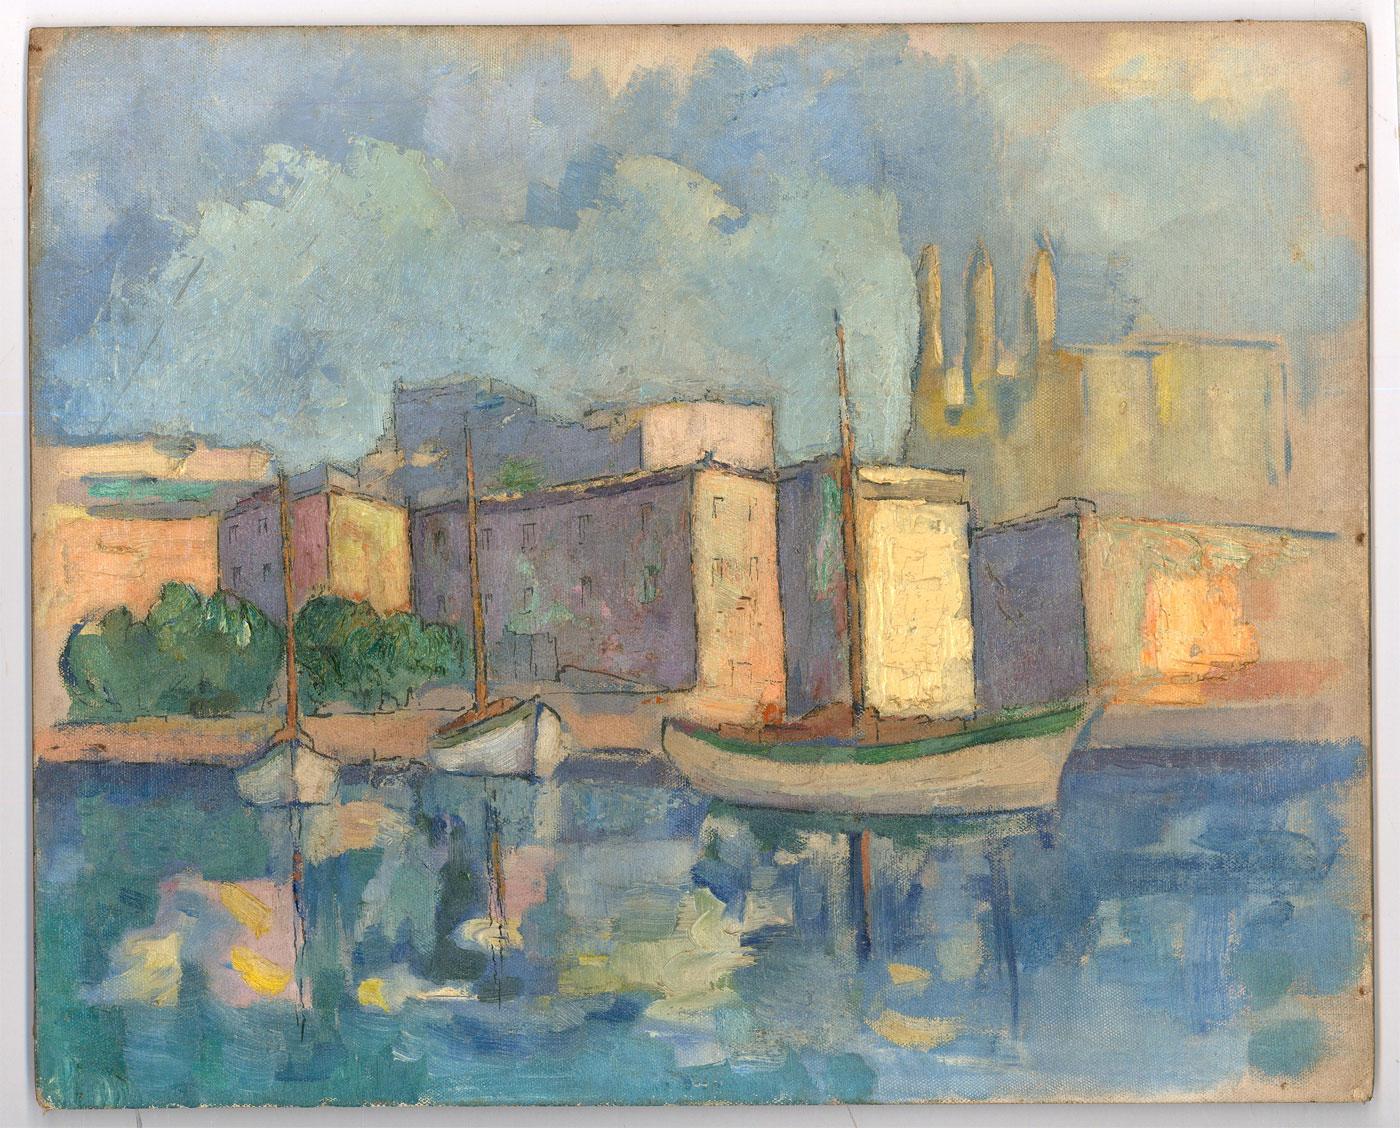 Continental School 20th Century Oil - City Mooring - Painting by Unknown